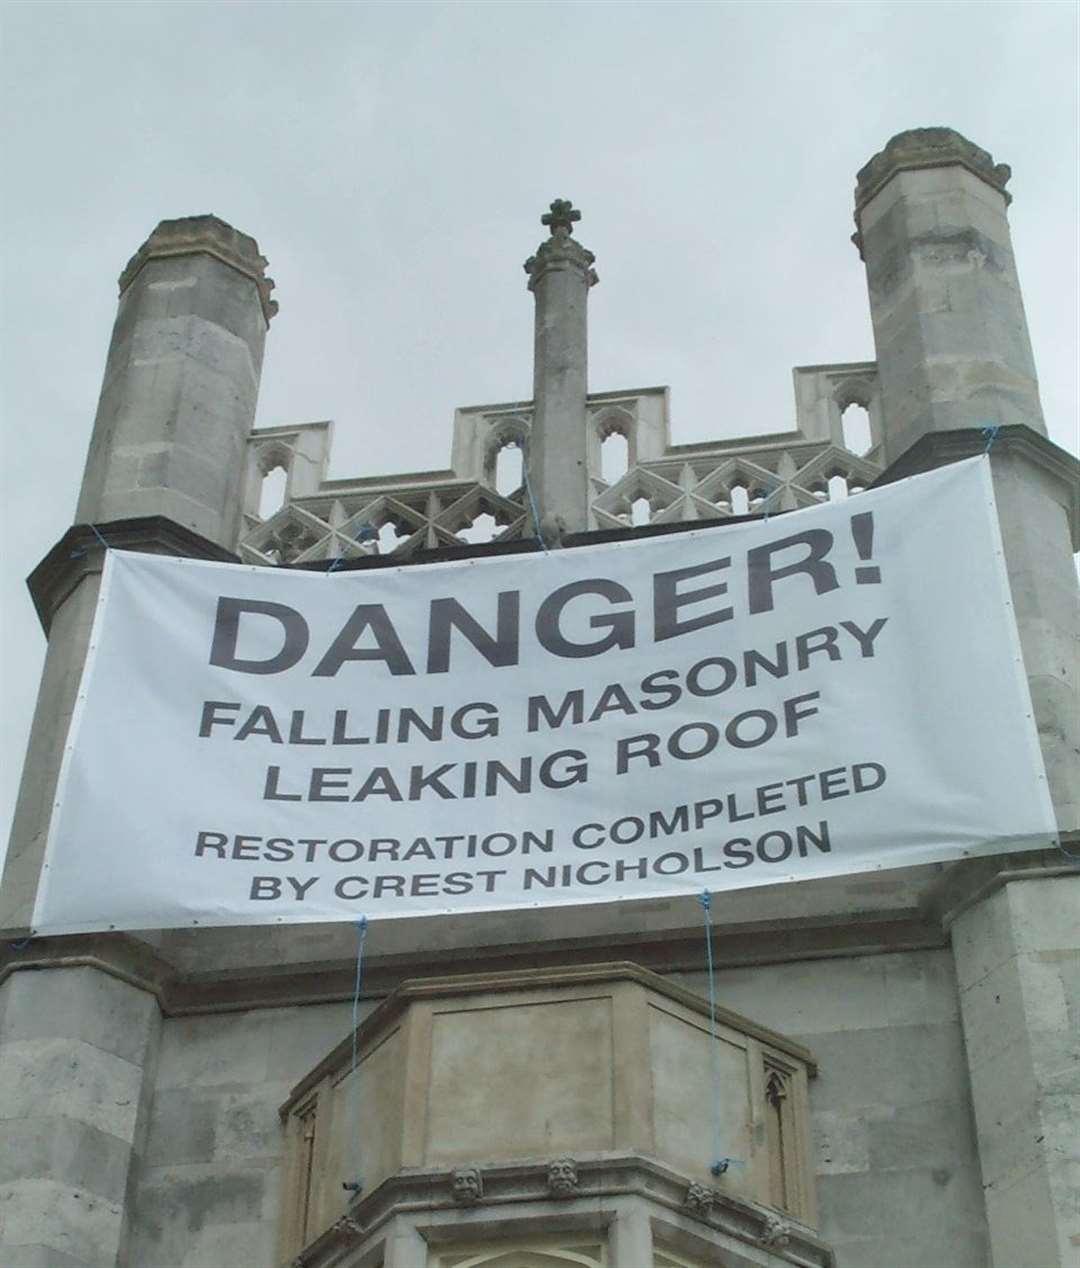 Pandora International's protest at Ingress Abbey following their dispute with Crest Nicholson, developers of Ingress Park.